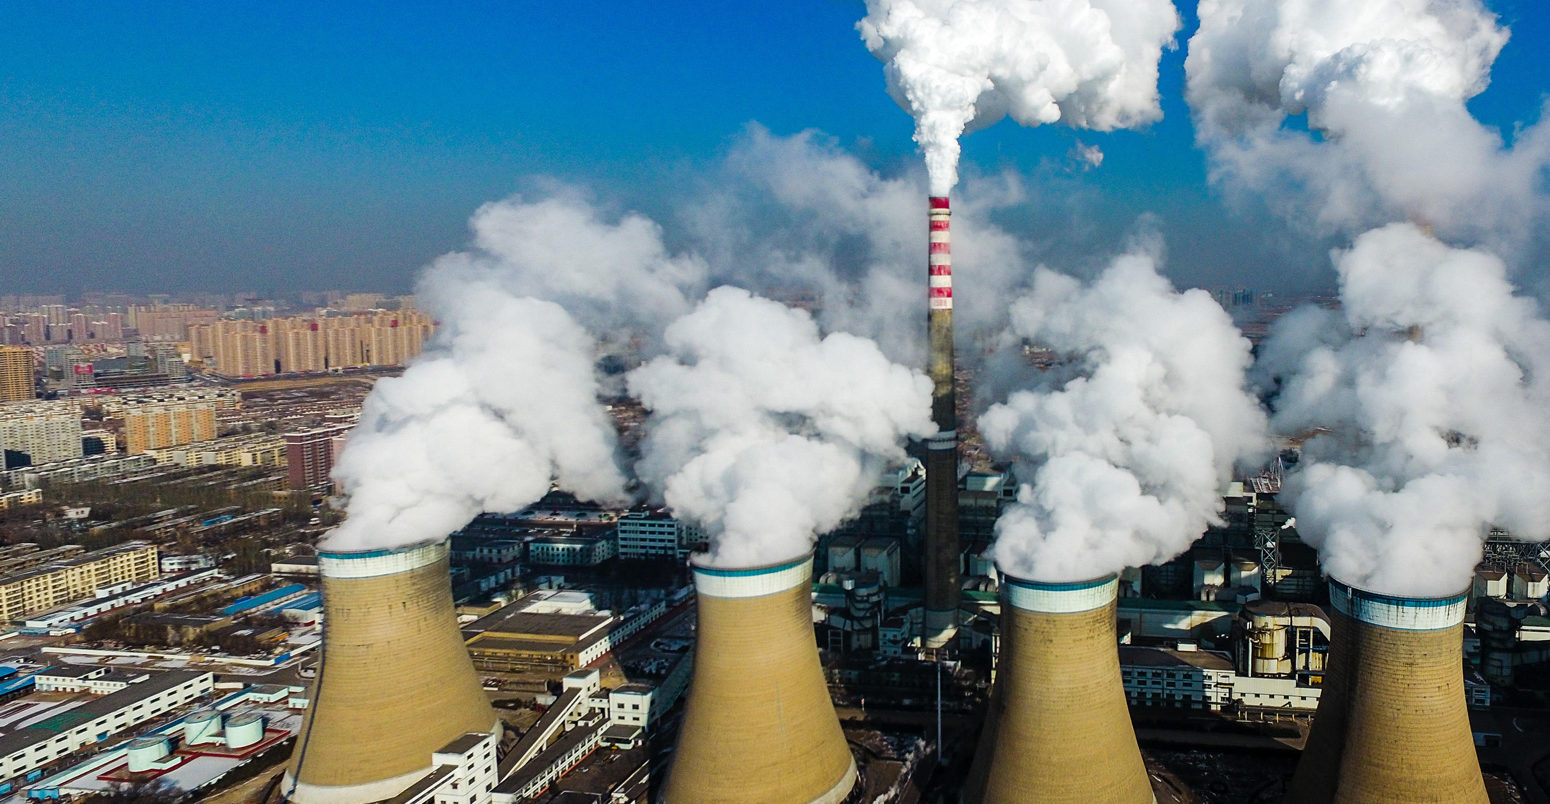 Smoke is discharged from chimneys at a coal-fired power plant in Datong city, Shanxi province